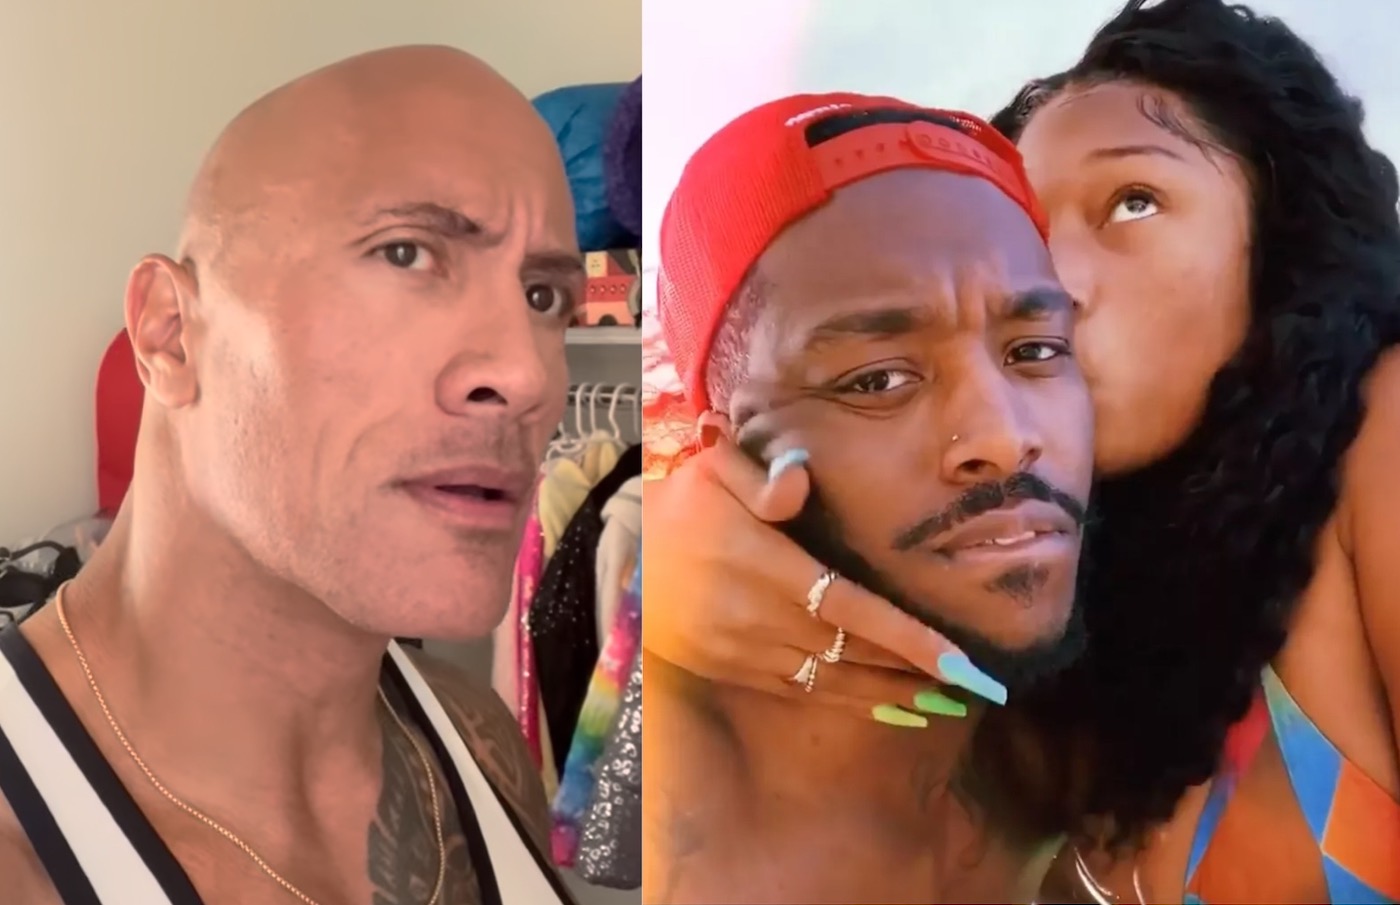 Pardison Fontaine Disses The Rock’s Wife After Thee Stallion ‘Pet’ Comment